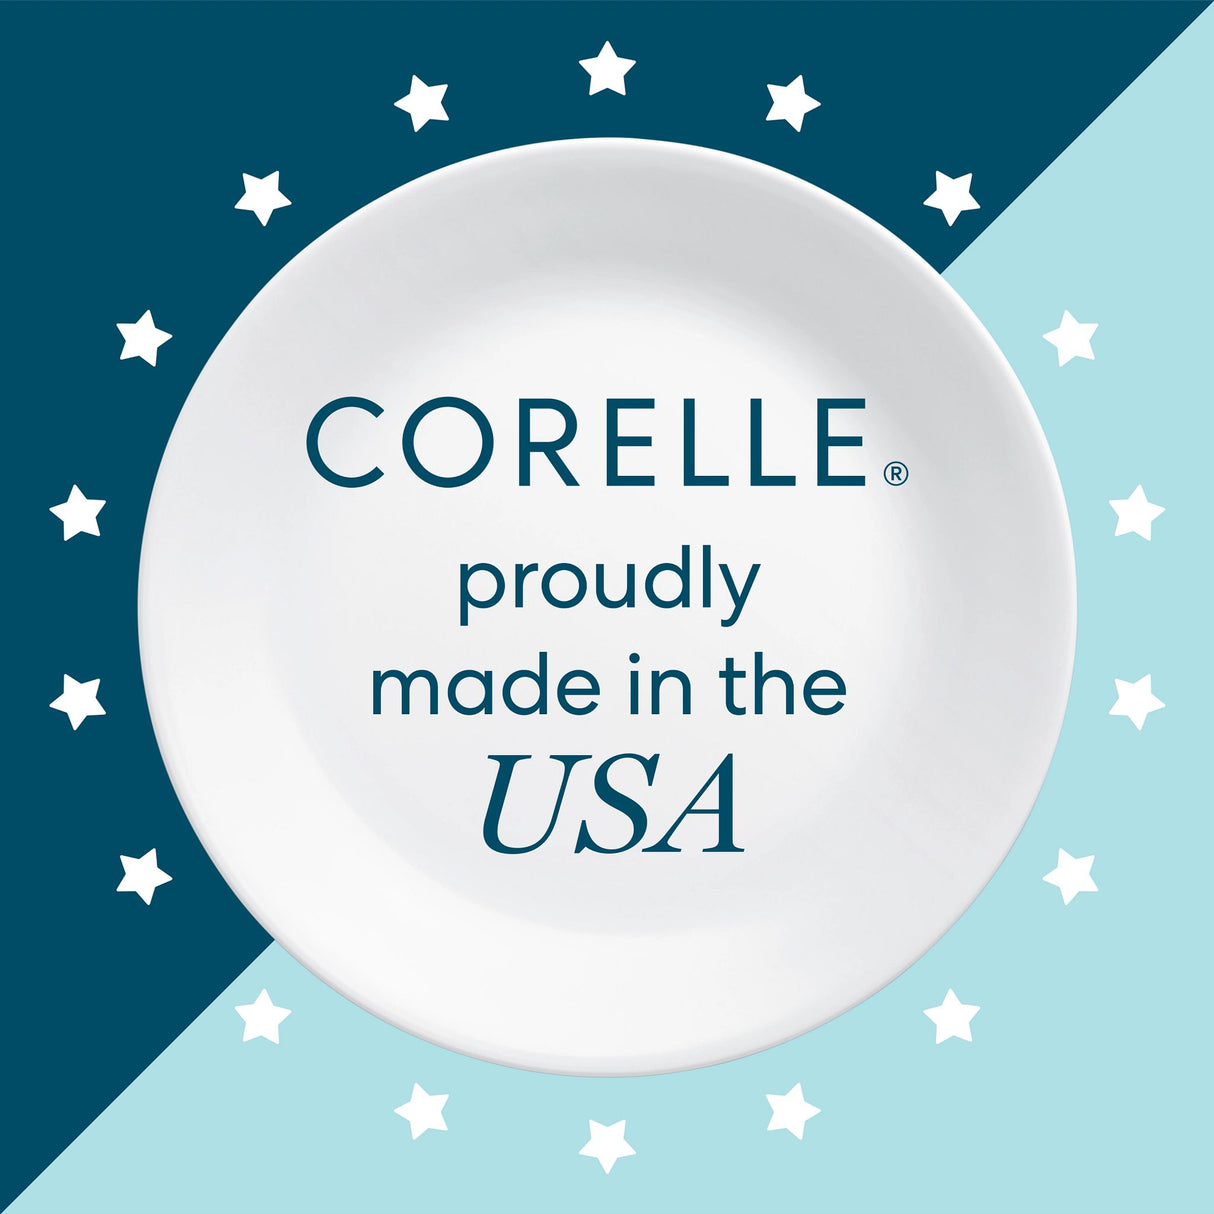  Corelle proudly Made in the USA text on white plate